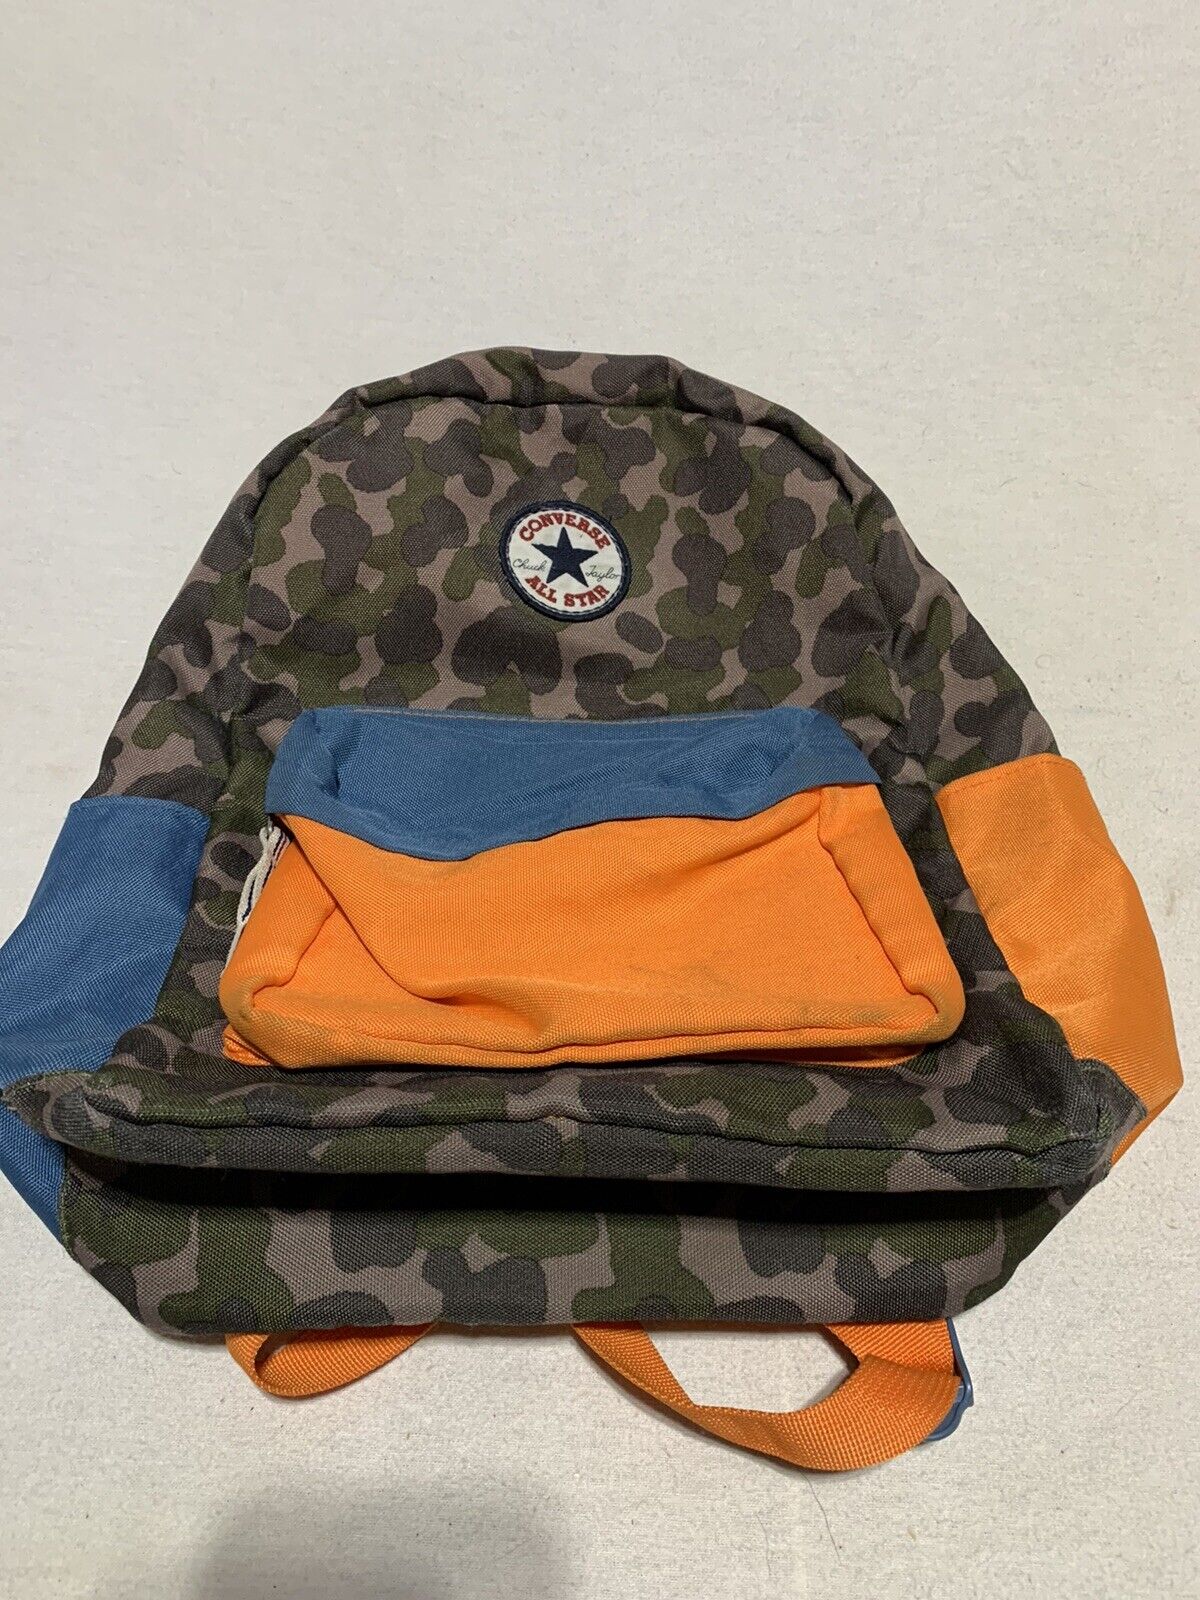 Converse All Star Chuck Taylor Backpack Green Camo Orange Accents Used |  eBay